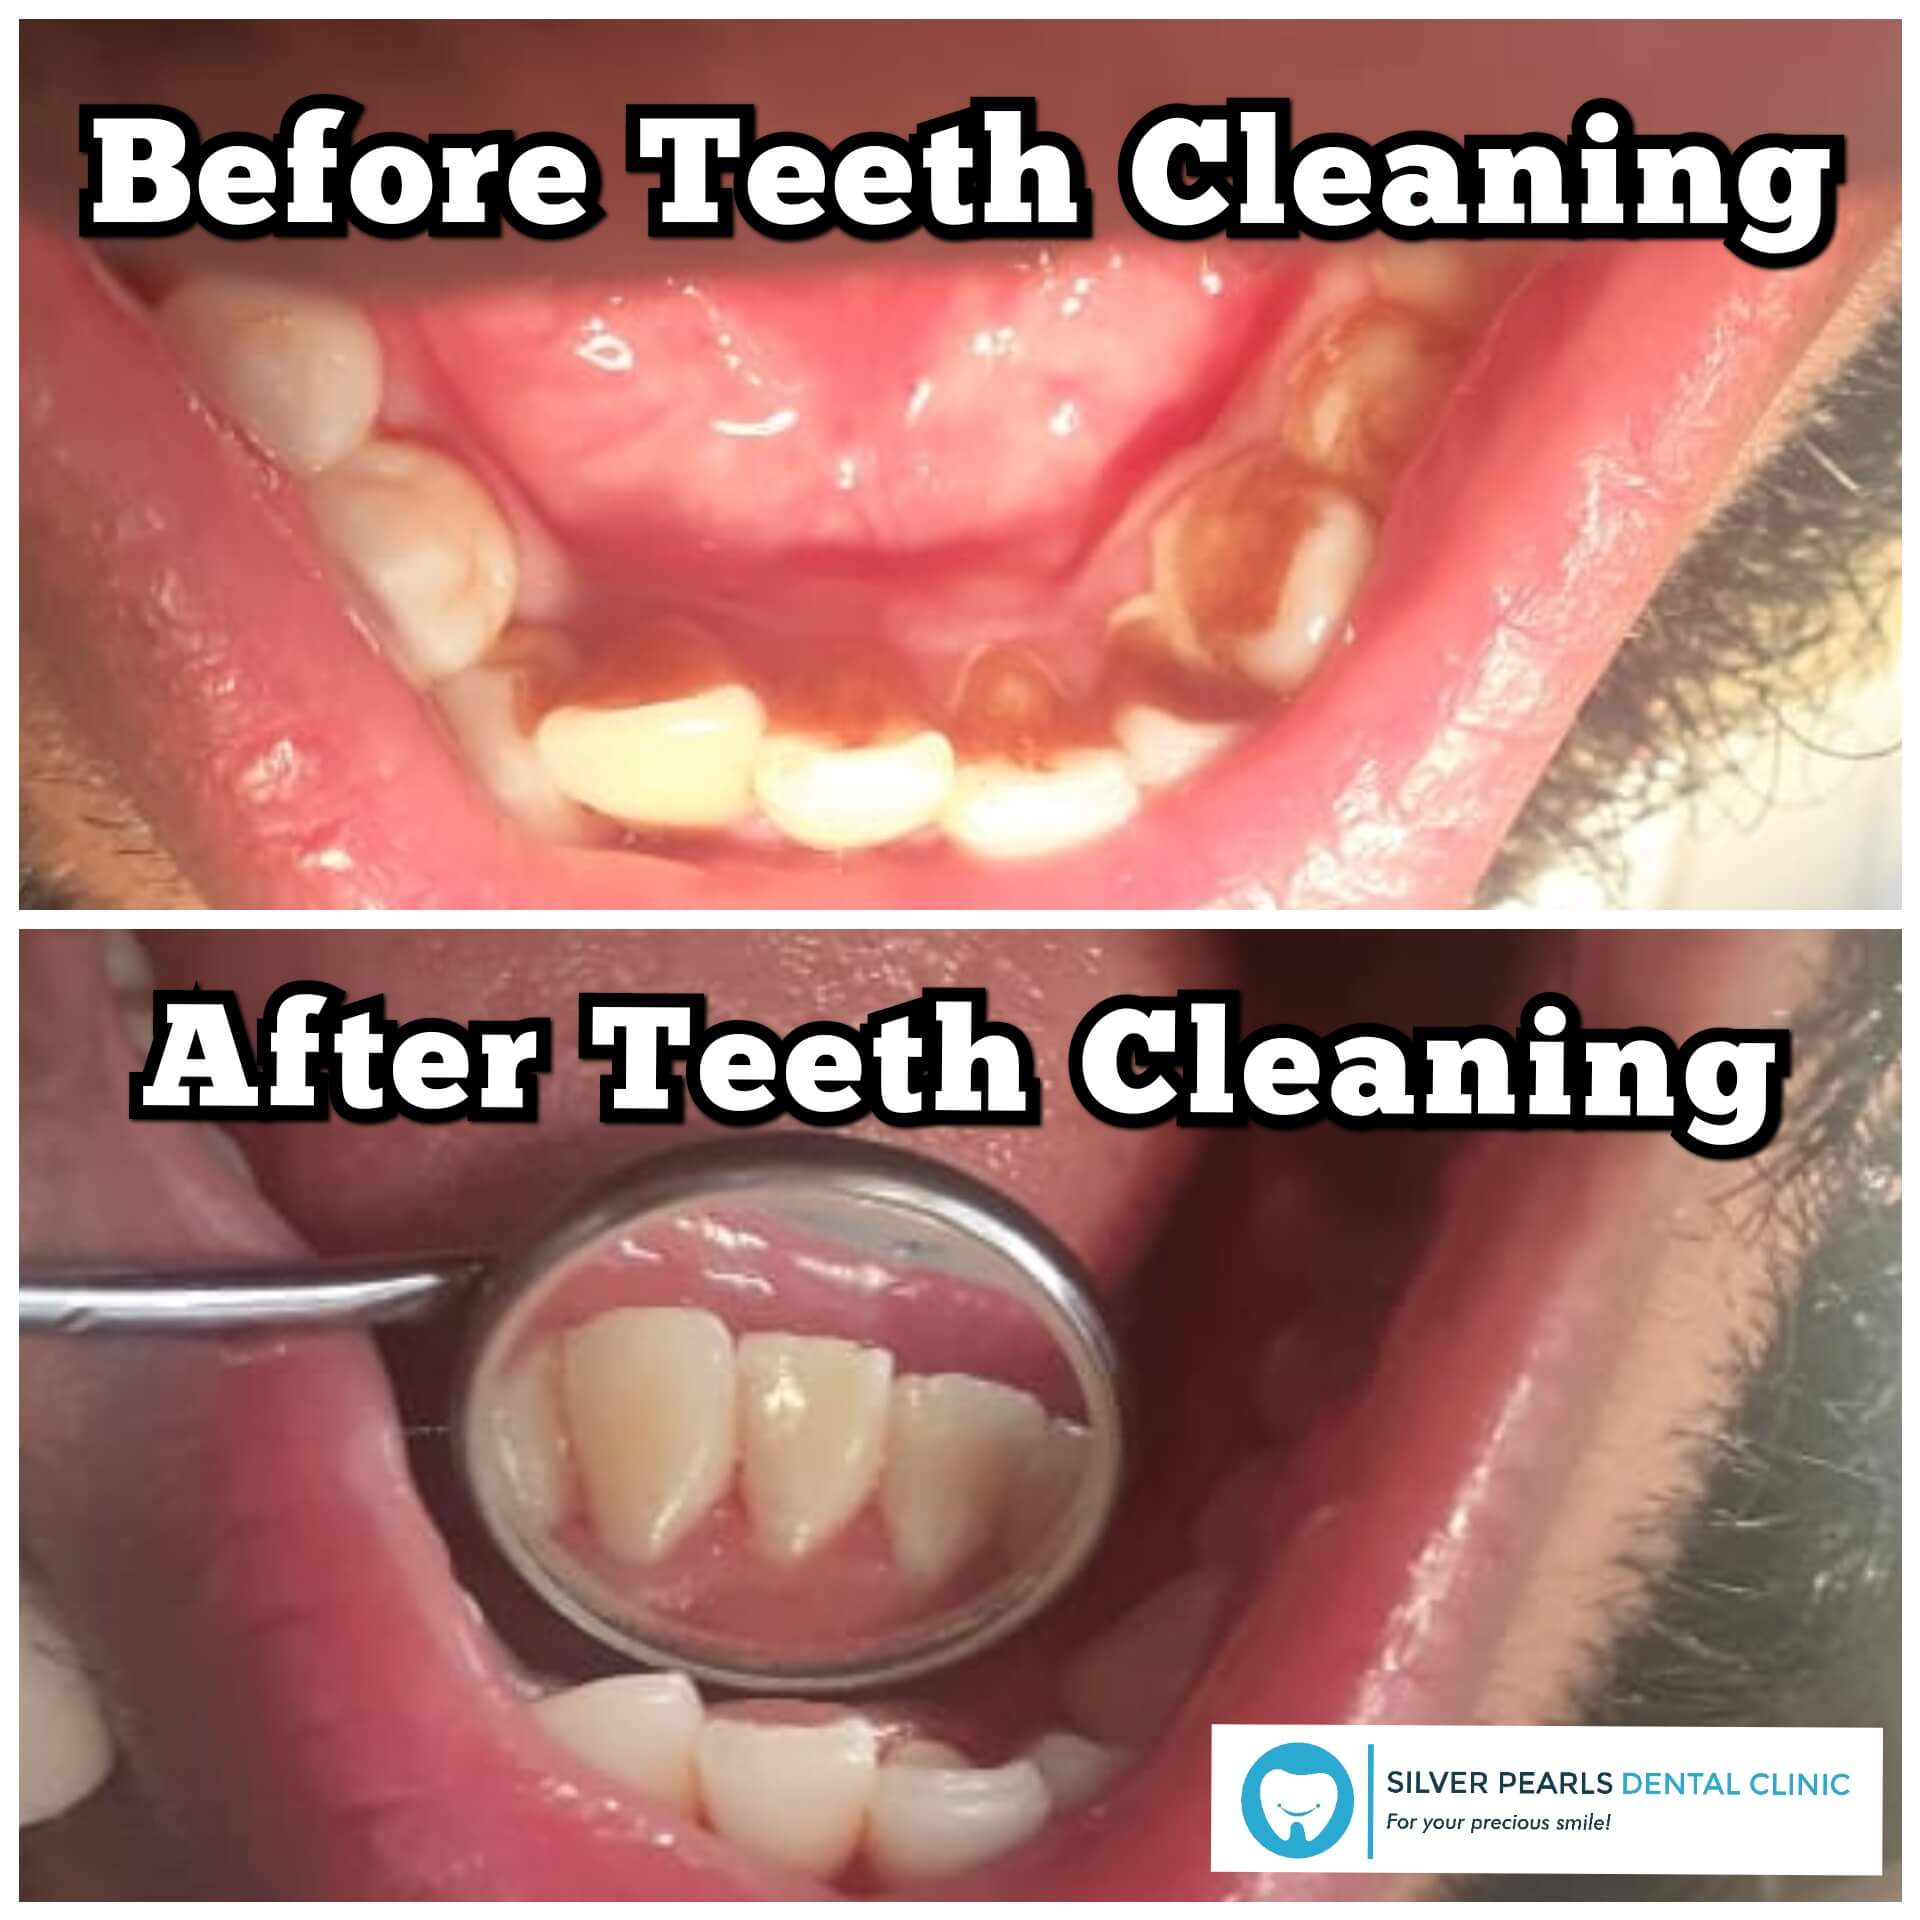 Teeth cleaning treatment by the dentist in Kothrud, Dr. Komal Adsool.